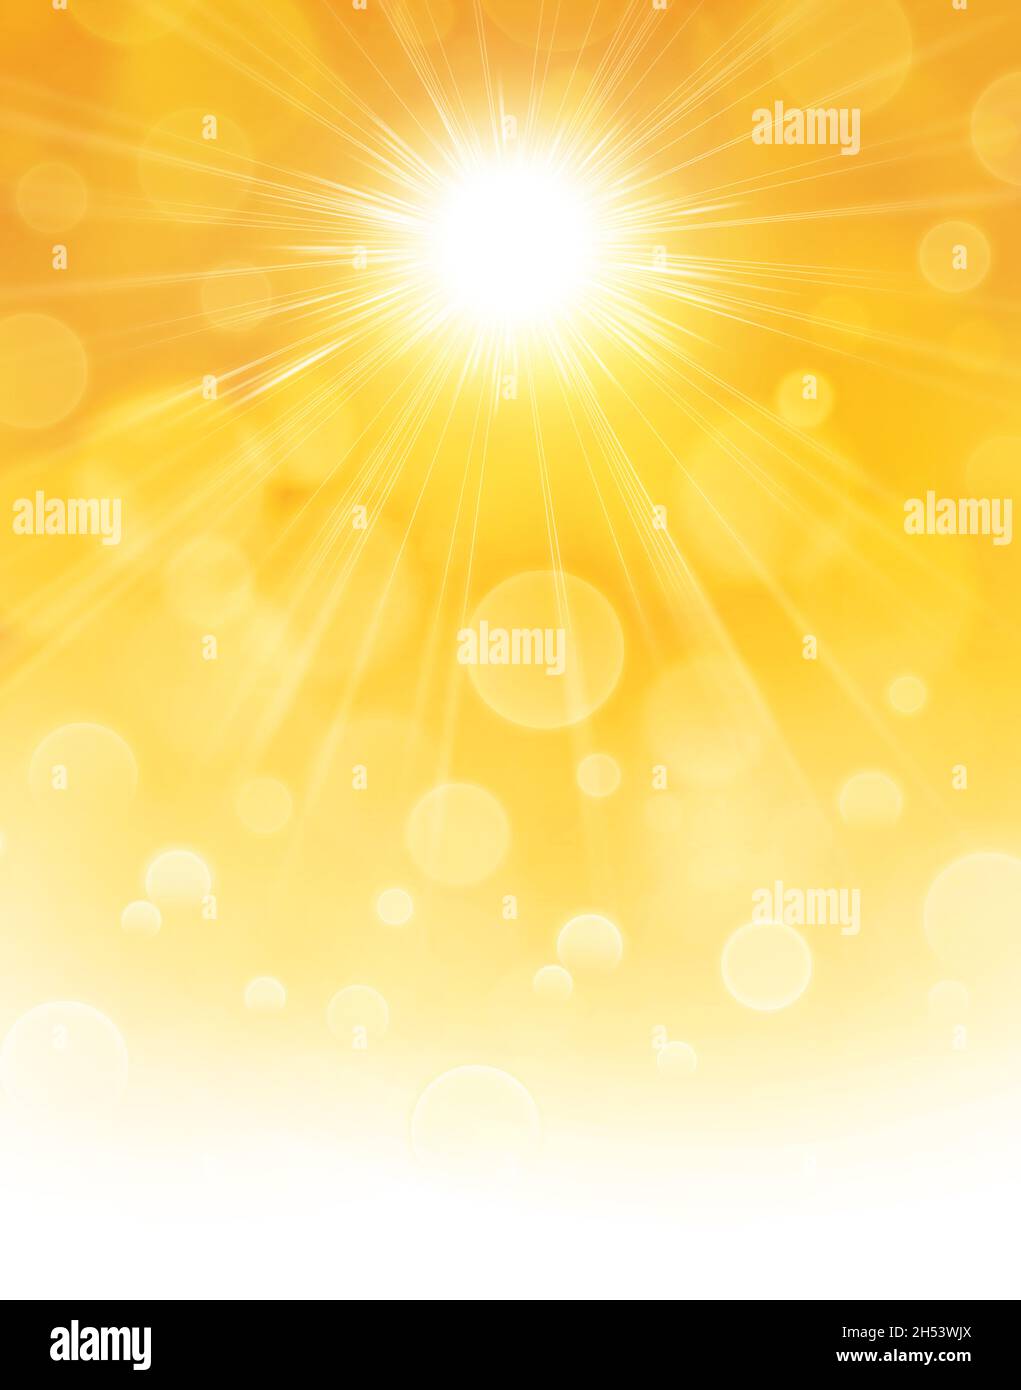 Sun rays shining on orange and yellow abstract background. Ambiance illustration of solar energy and heat waves in summer. Stock Photo